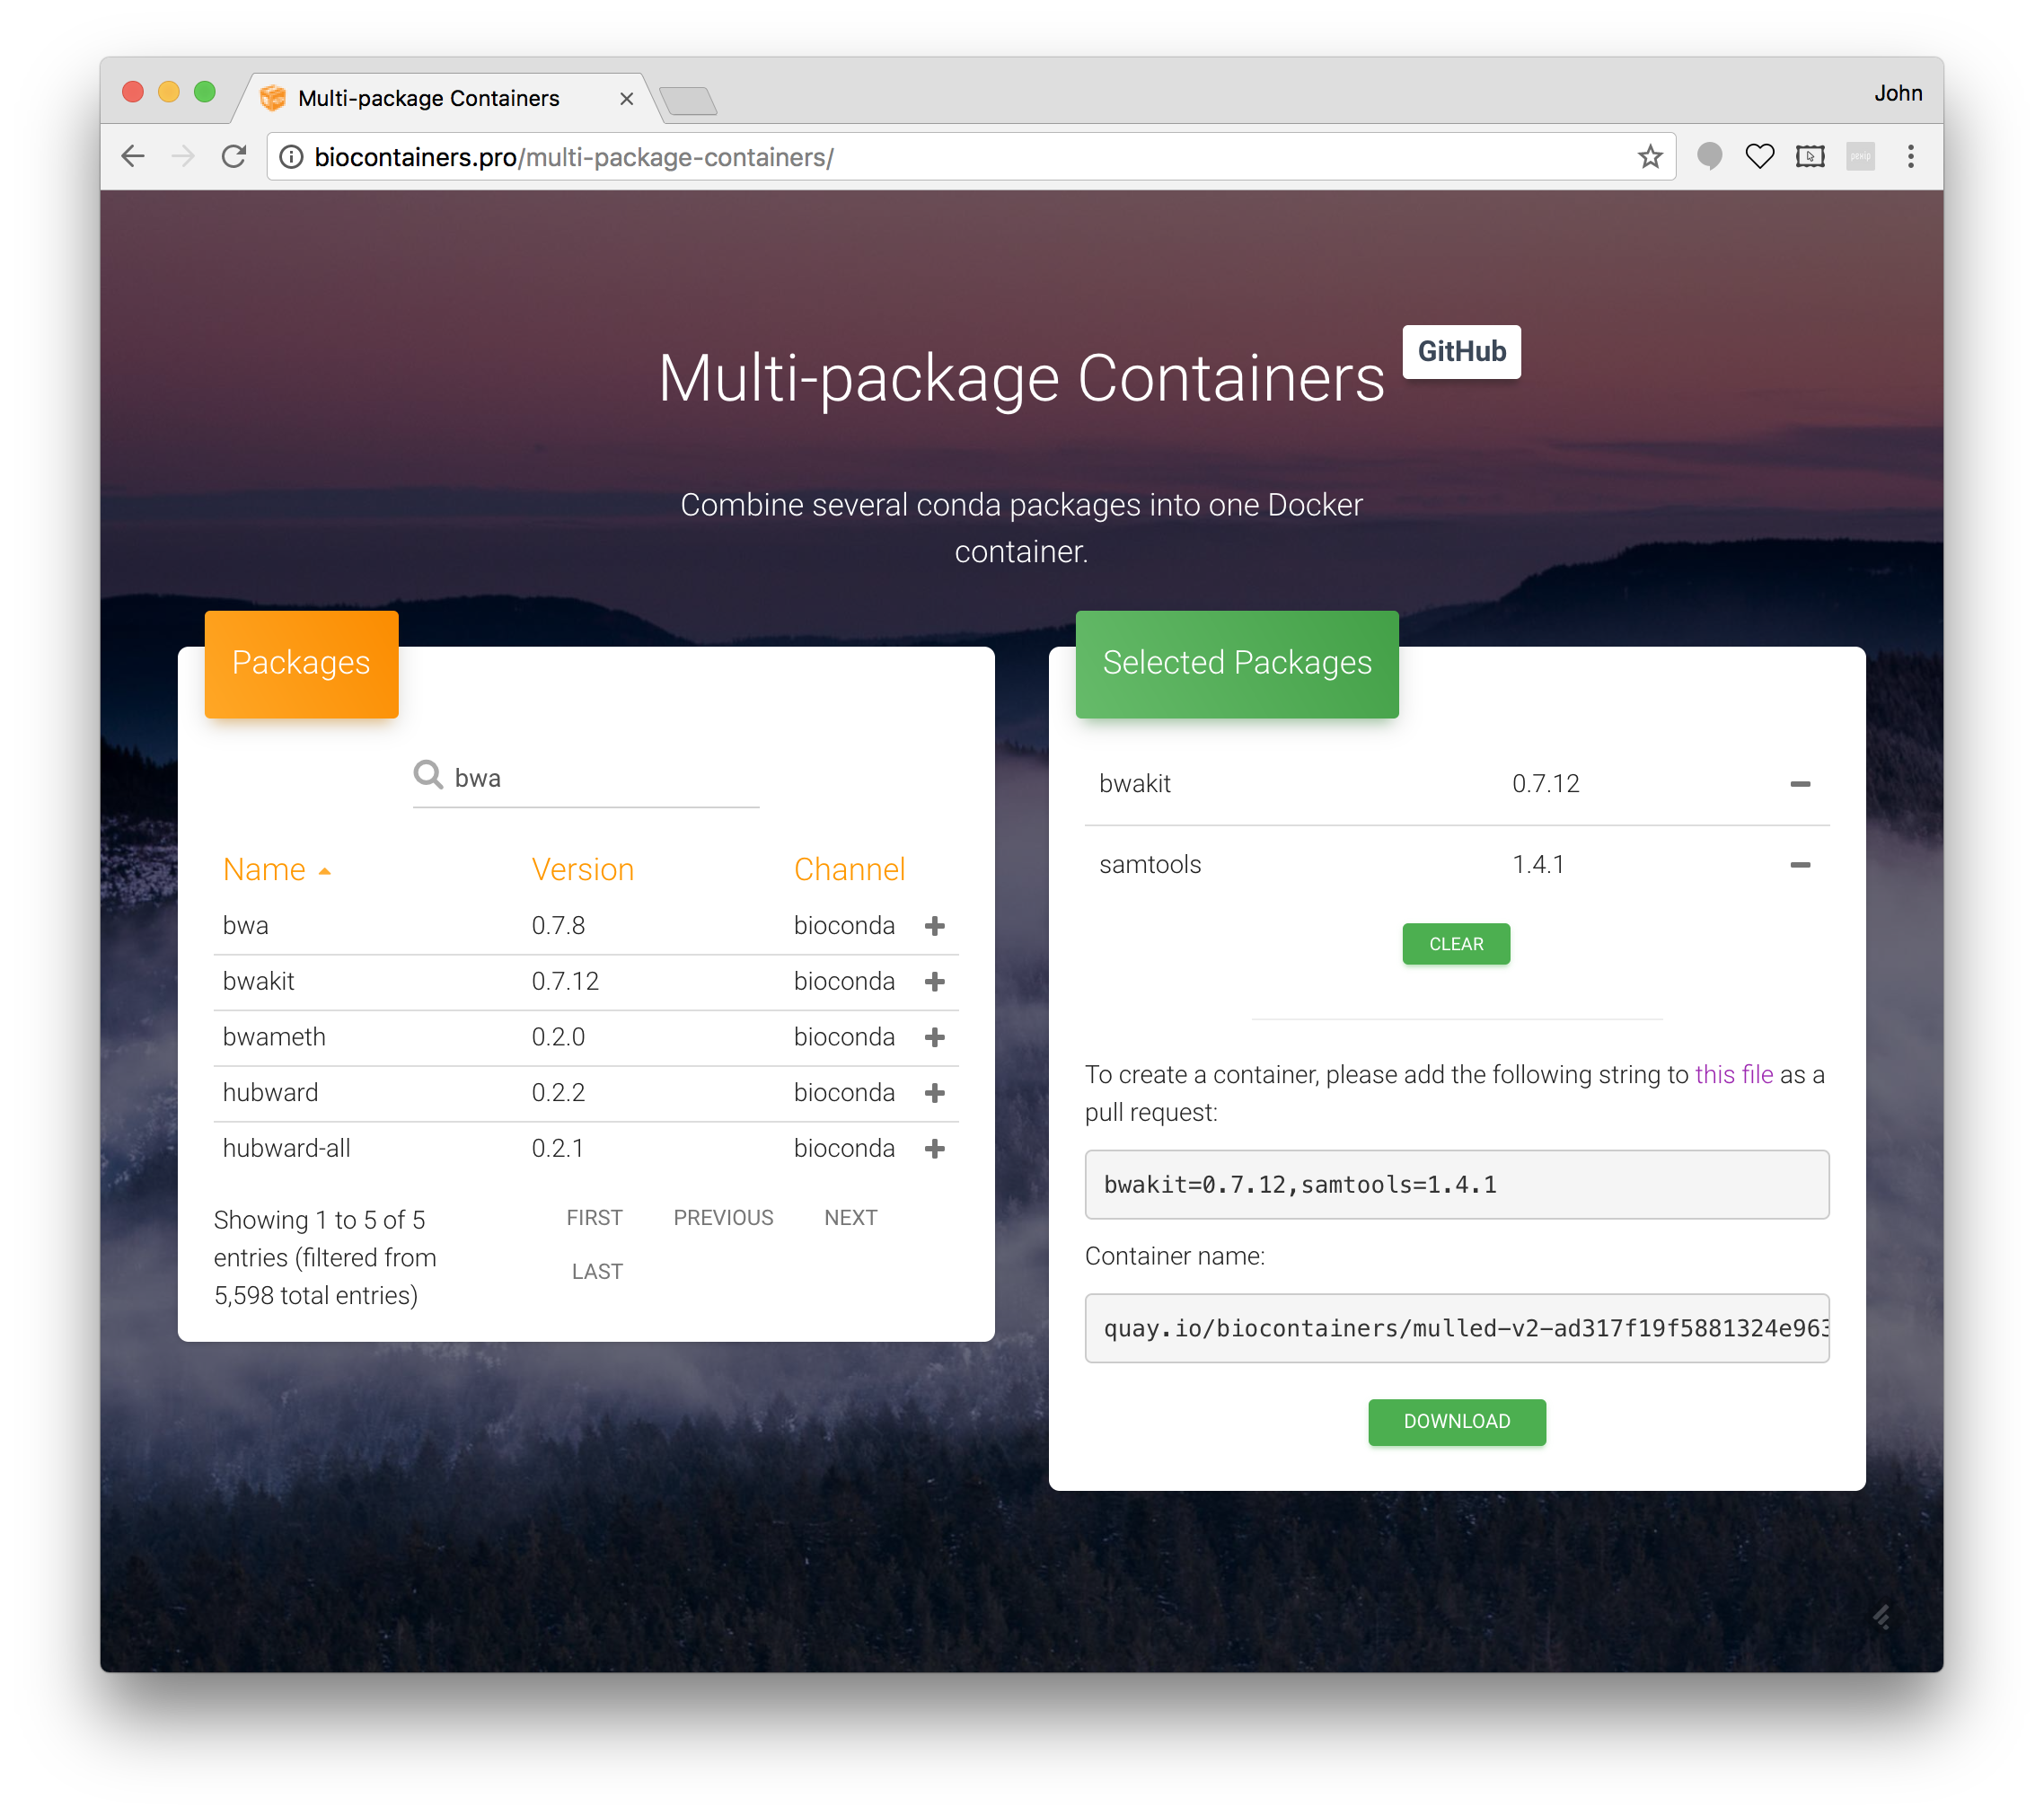 Screenshot of biocontainers page showing an information page for multi-package containers. 